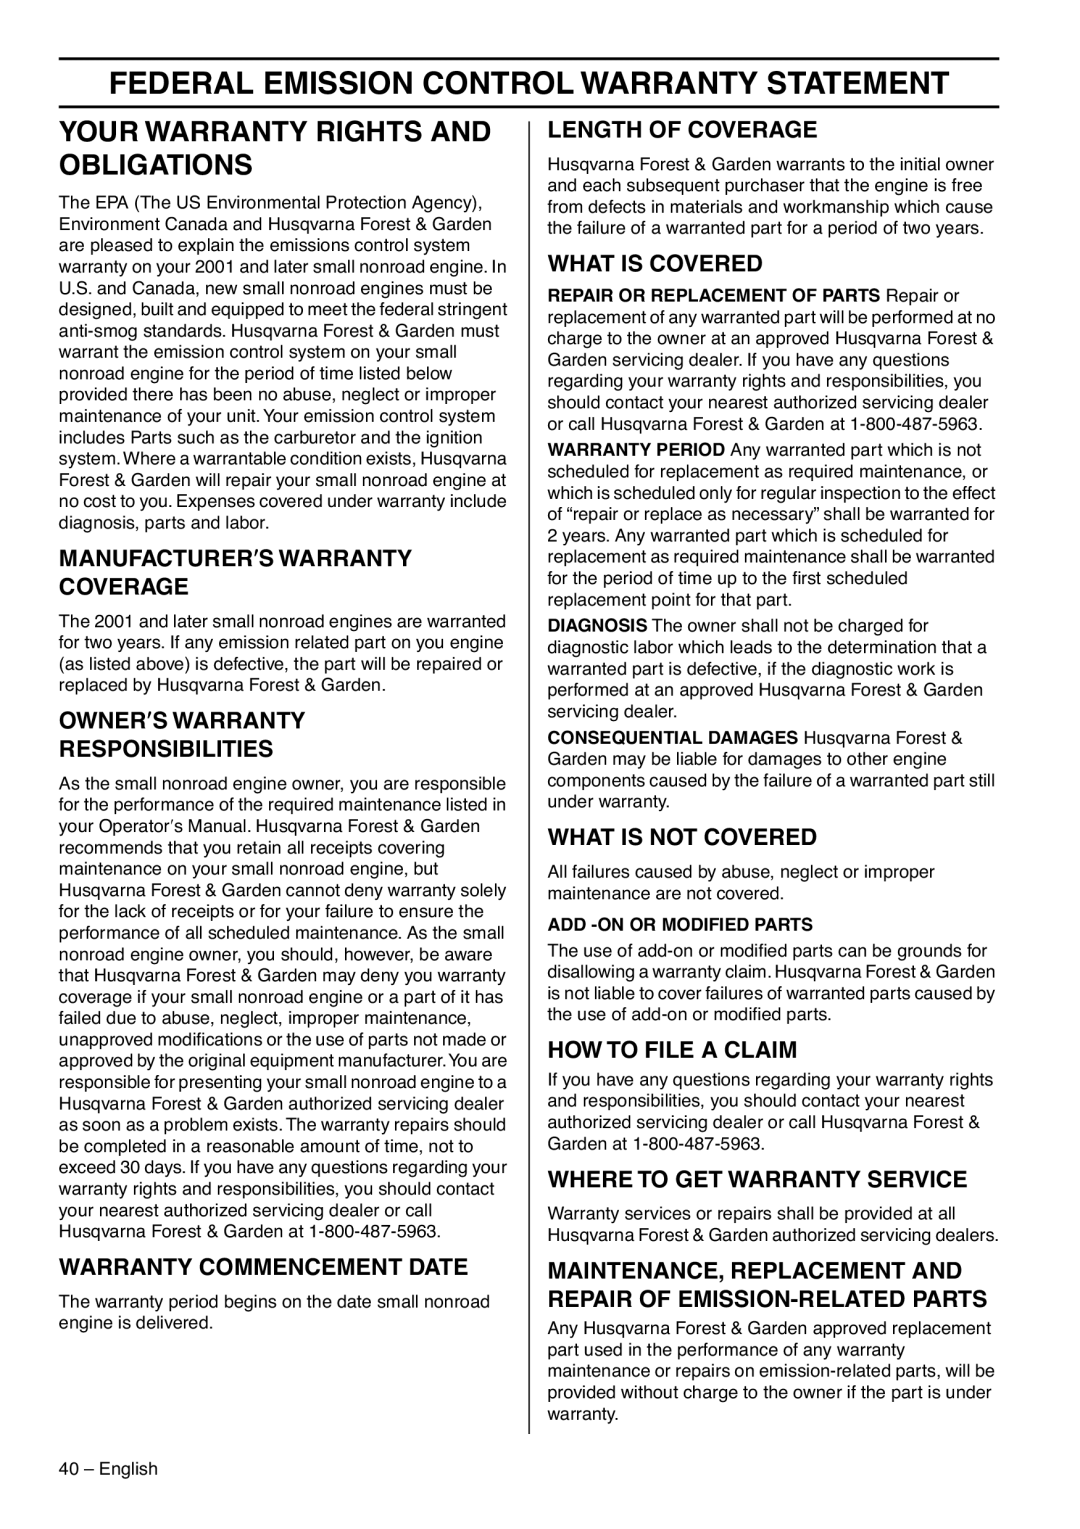 Husqvarna 1153183-95 Federal Emission Control Warranty Statement, Your Warranty Rights And Obligations, Length Of Coverage 